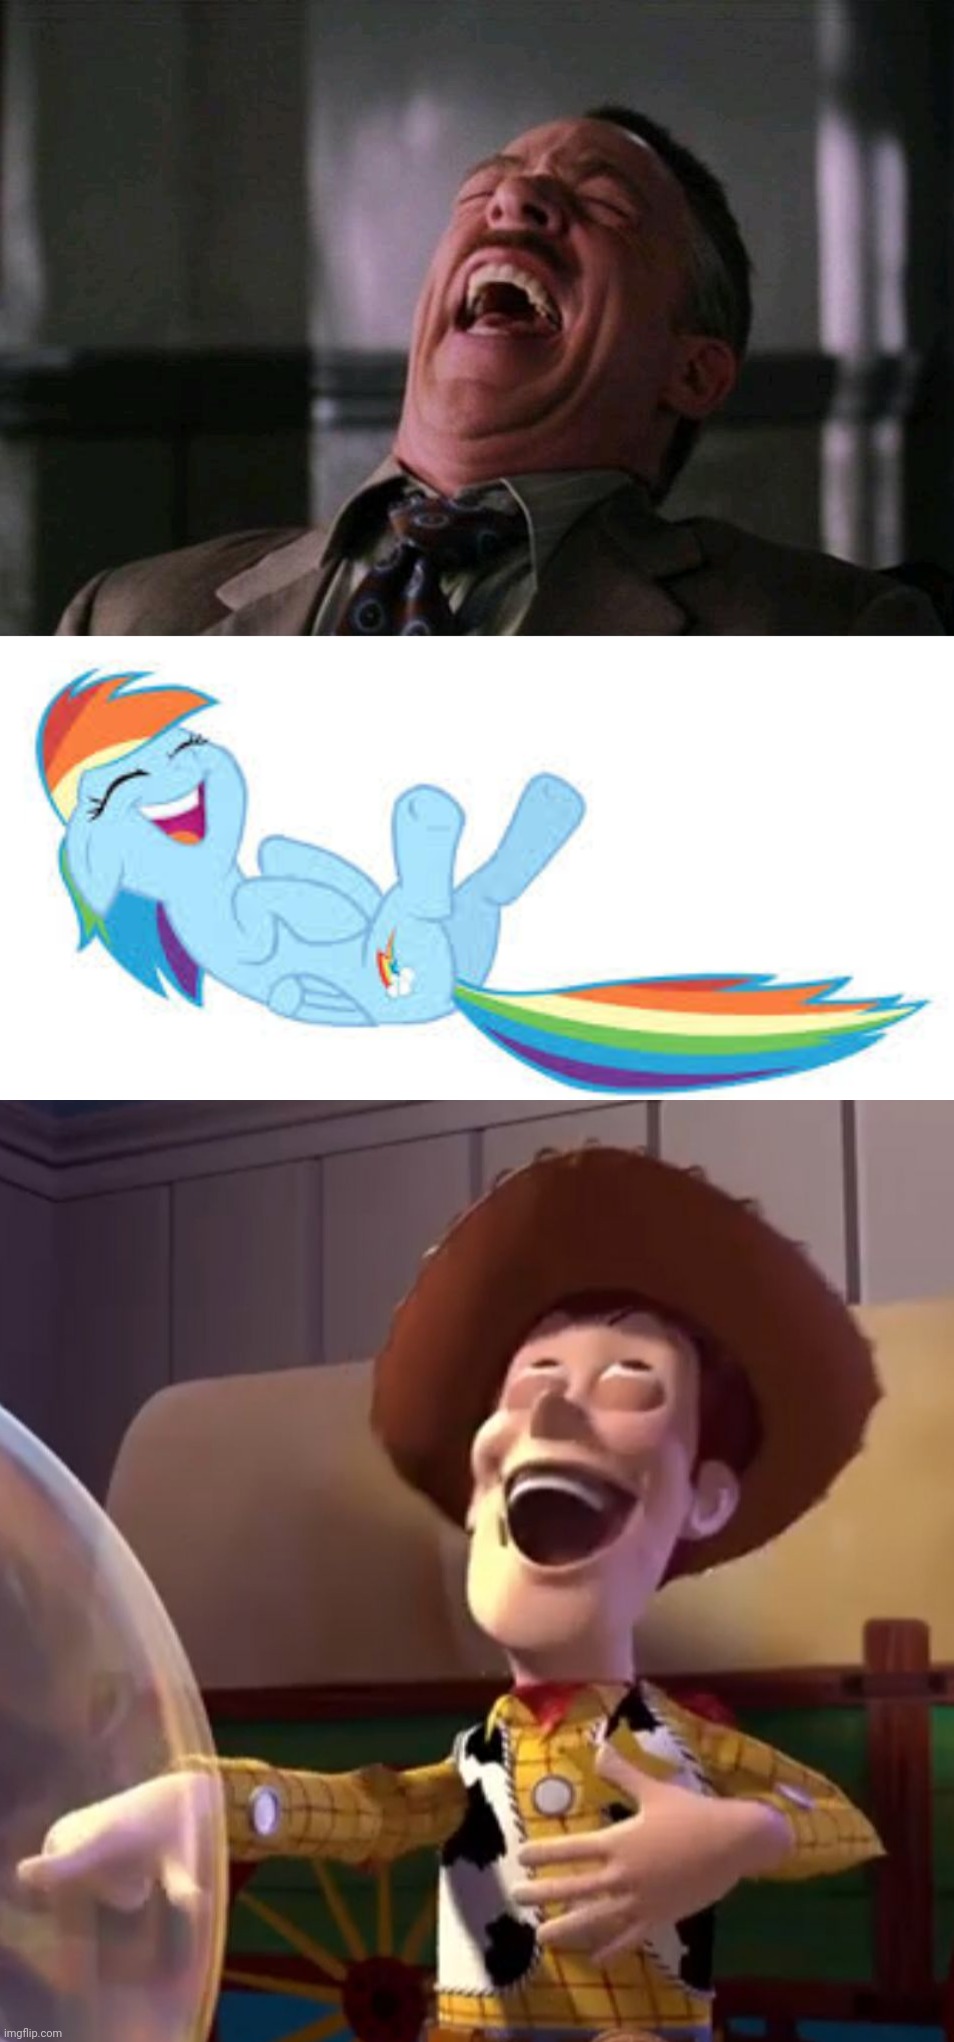 image tagged in rofl,rainbow dash rofl,toy story funny scene | made w/ Imgflip meme maker